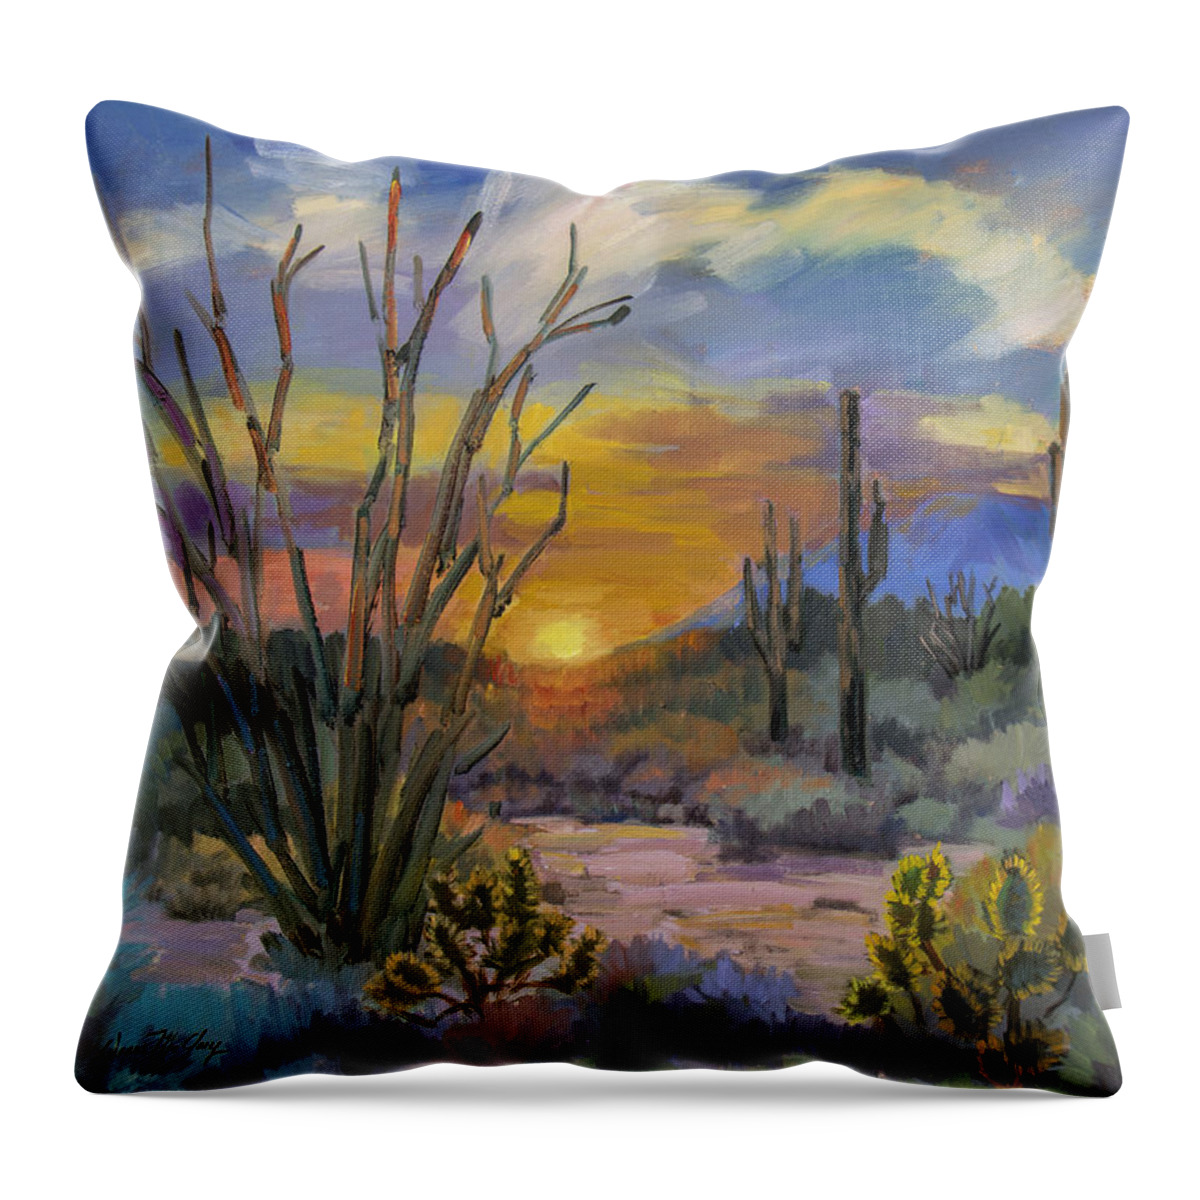 Sonoran Desert Throw Pillow featuring the painting God's Day - Sonoran Desert by Diane McClary